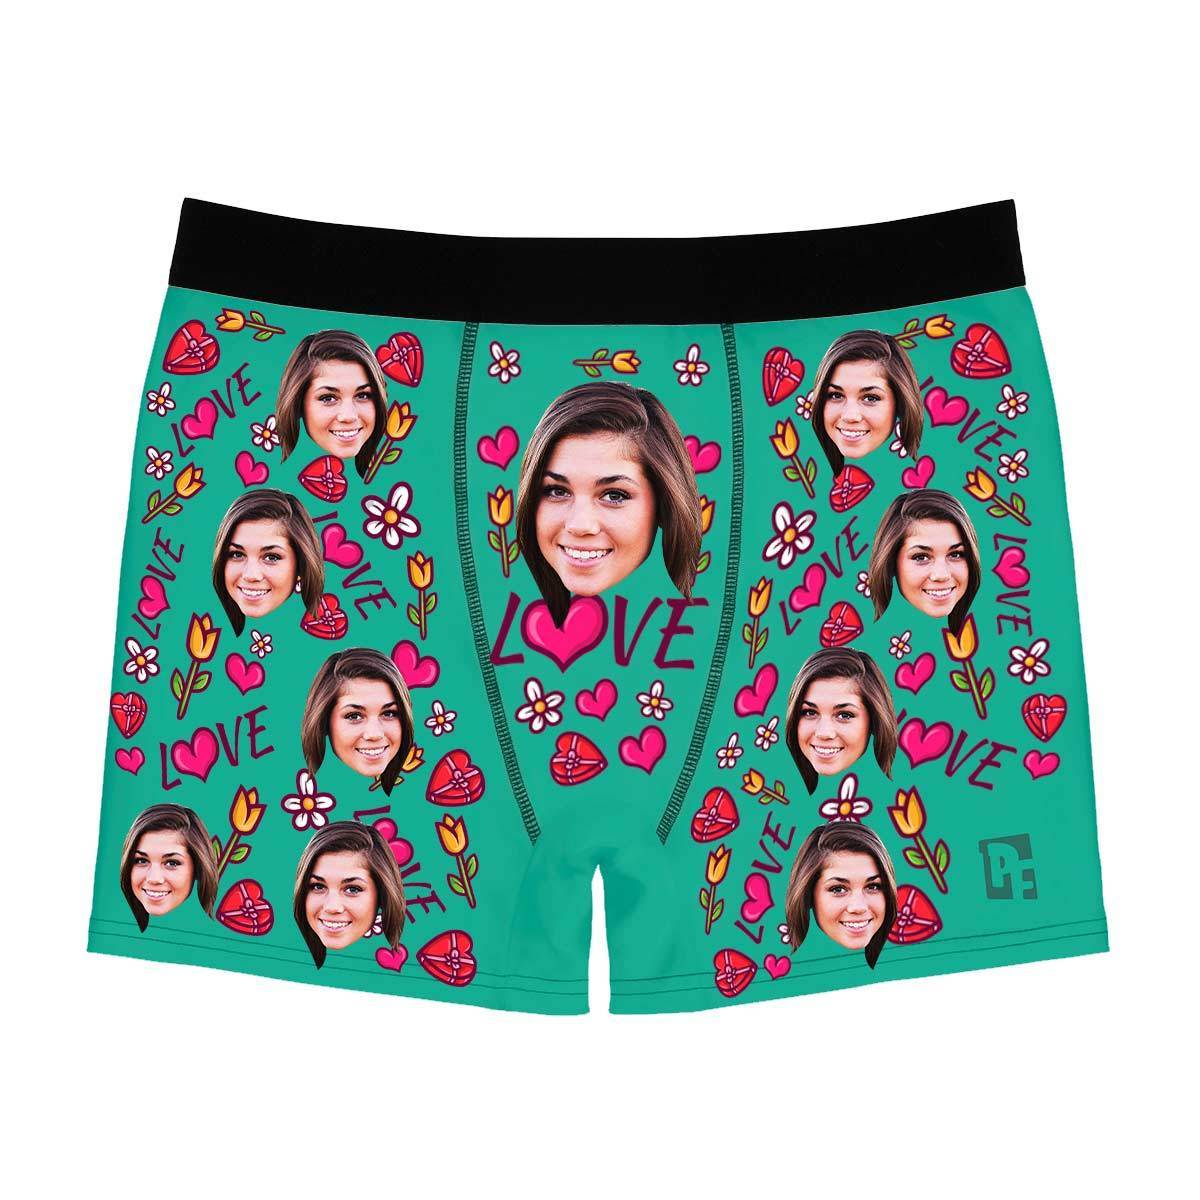 Mint Hearts and Flowers men's boxer briefs personalized with photo printed on them